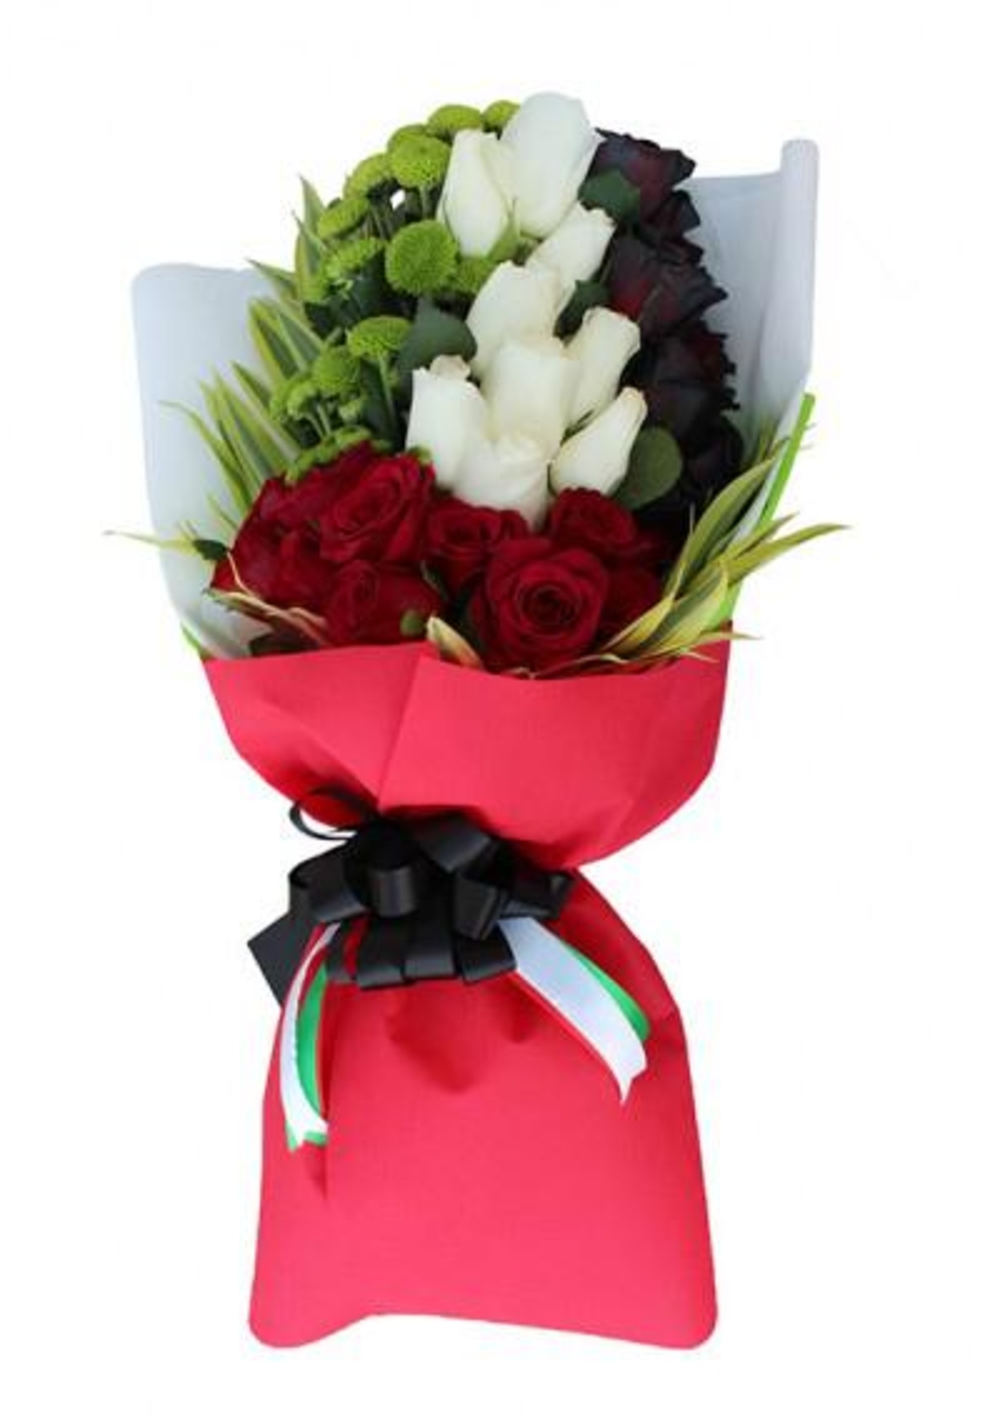 UAE National Day floral bouquet